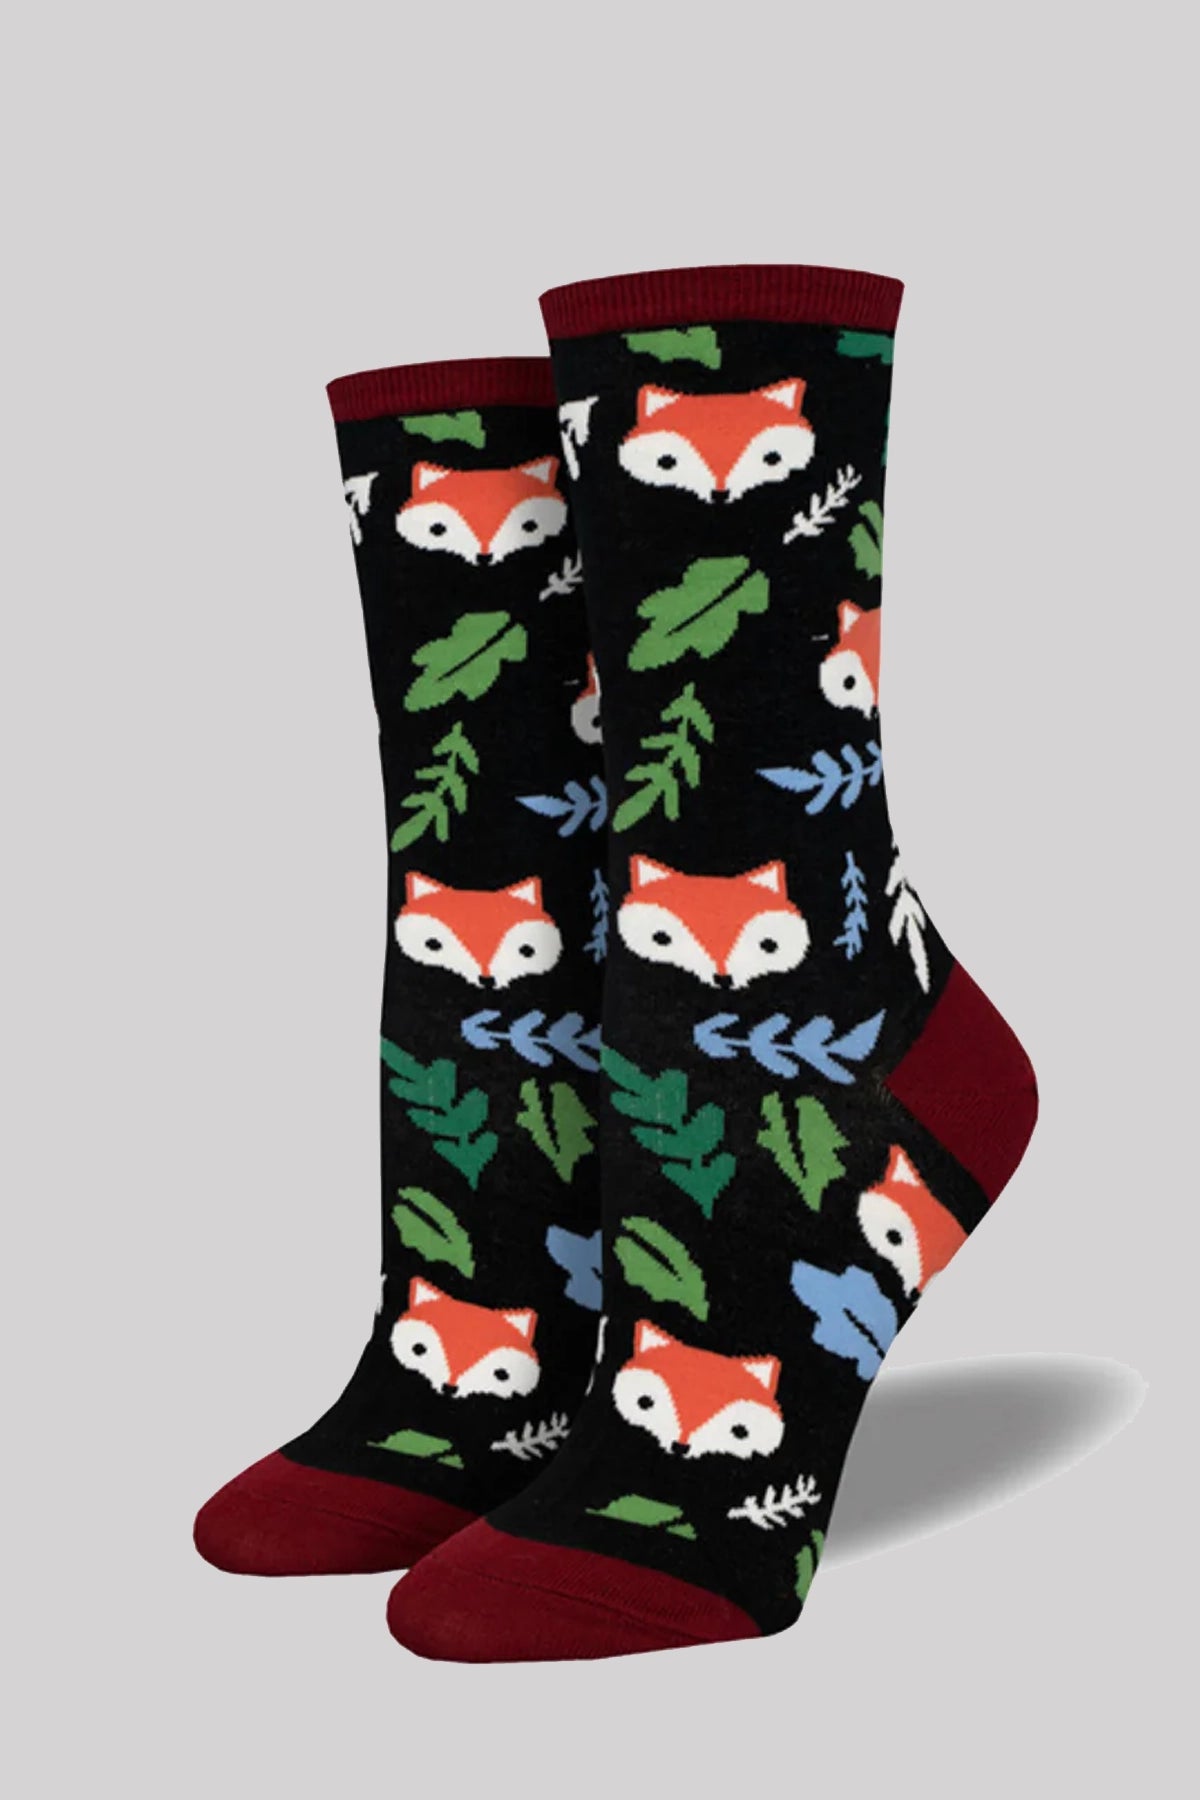 Ro Rox Nature Black Fox leaf Cute Character Quirky Ankle Socks